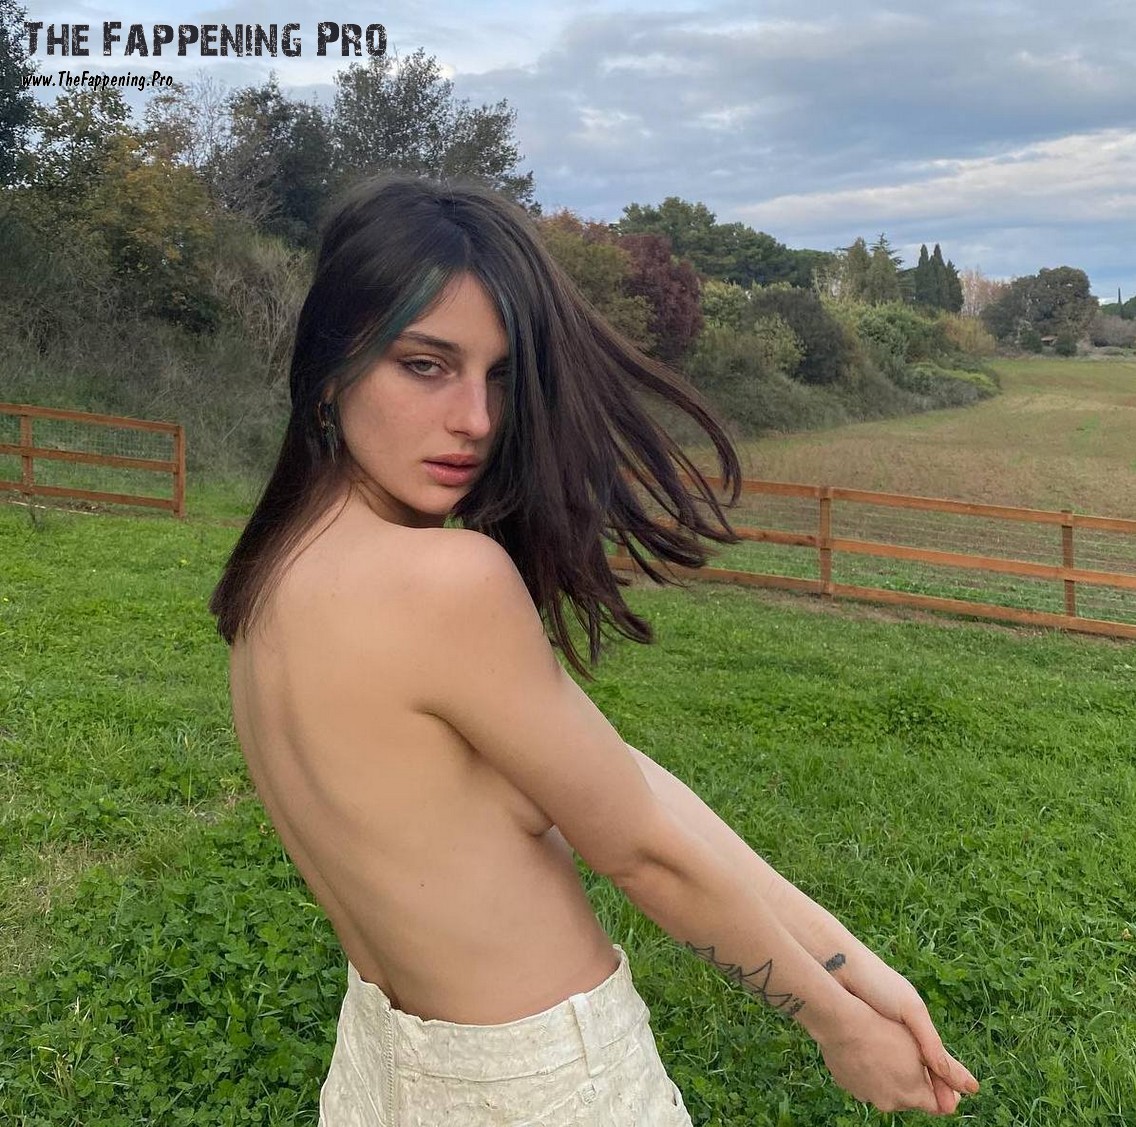 Alice Pagani Topless TheFappening.Pro 10 - Alice Pagani Nude Italian Actress (Over 200 Leaked Photos)